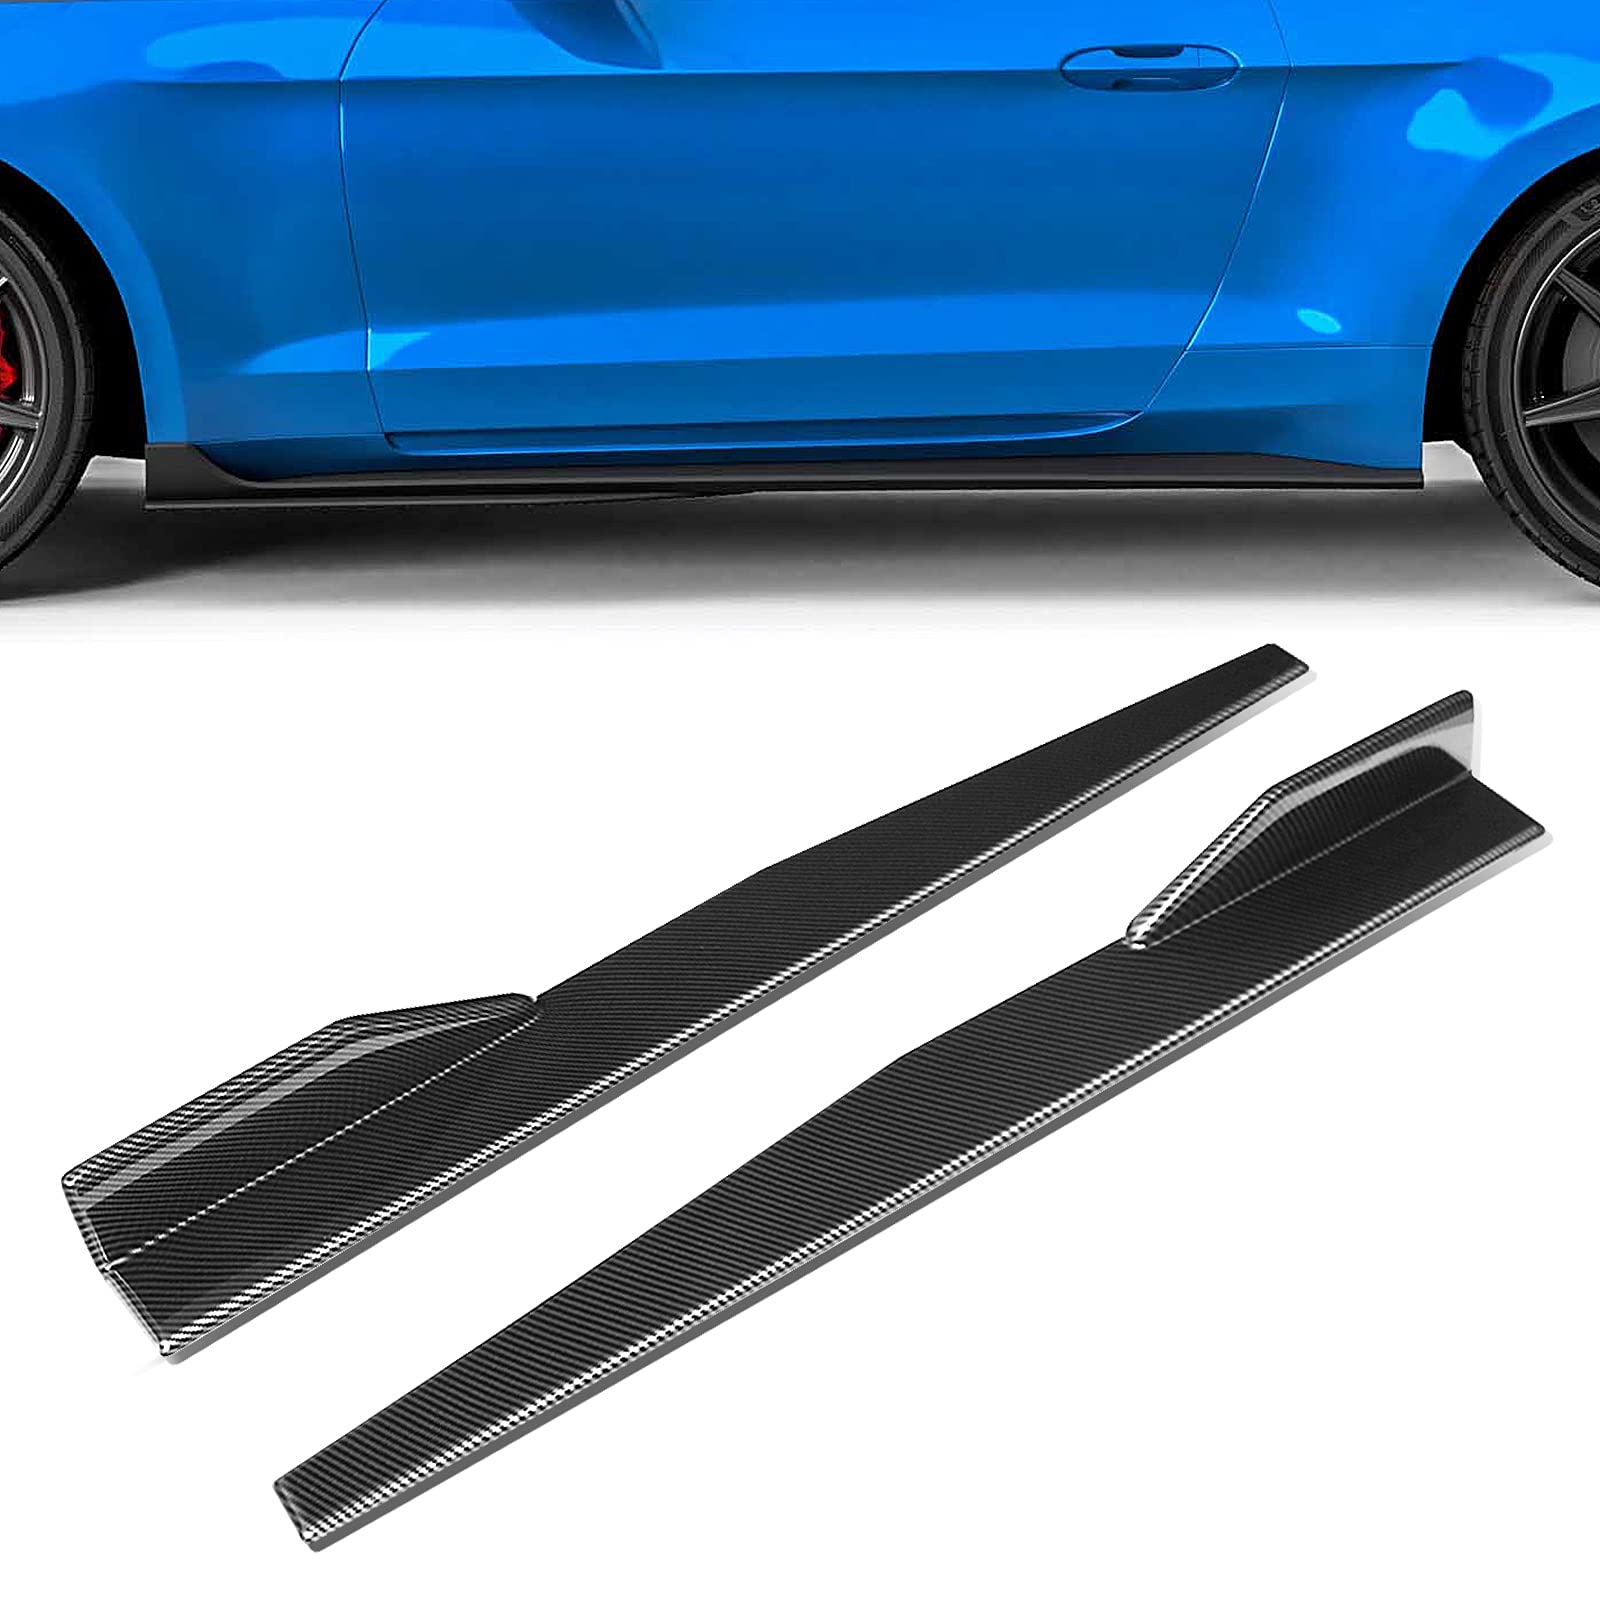 What is the function of the side skirt of the car and can it be replaced?